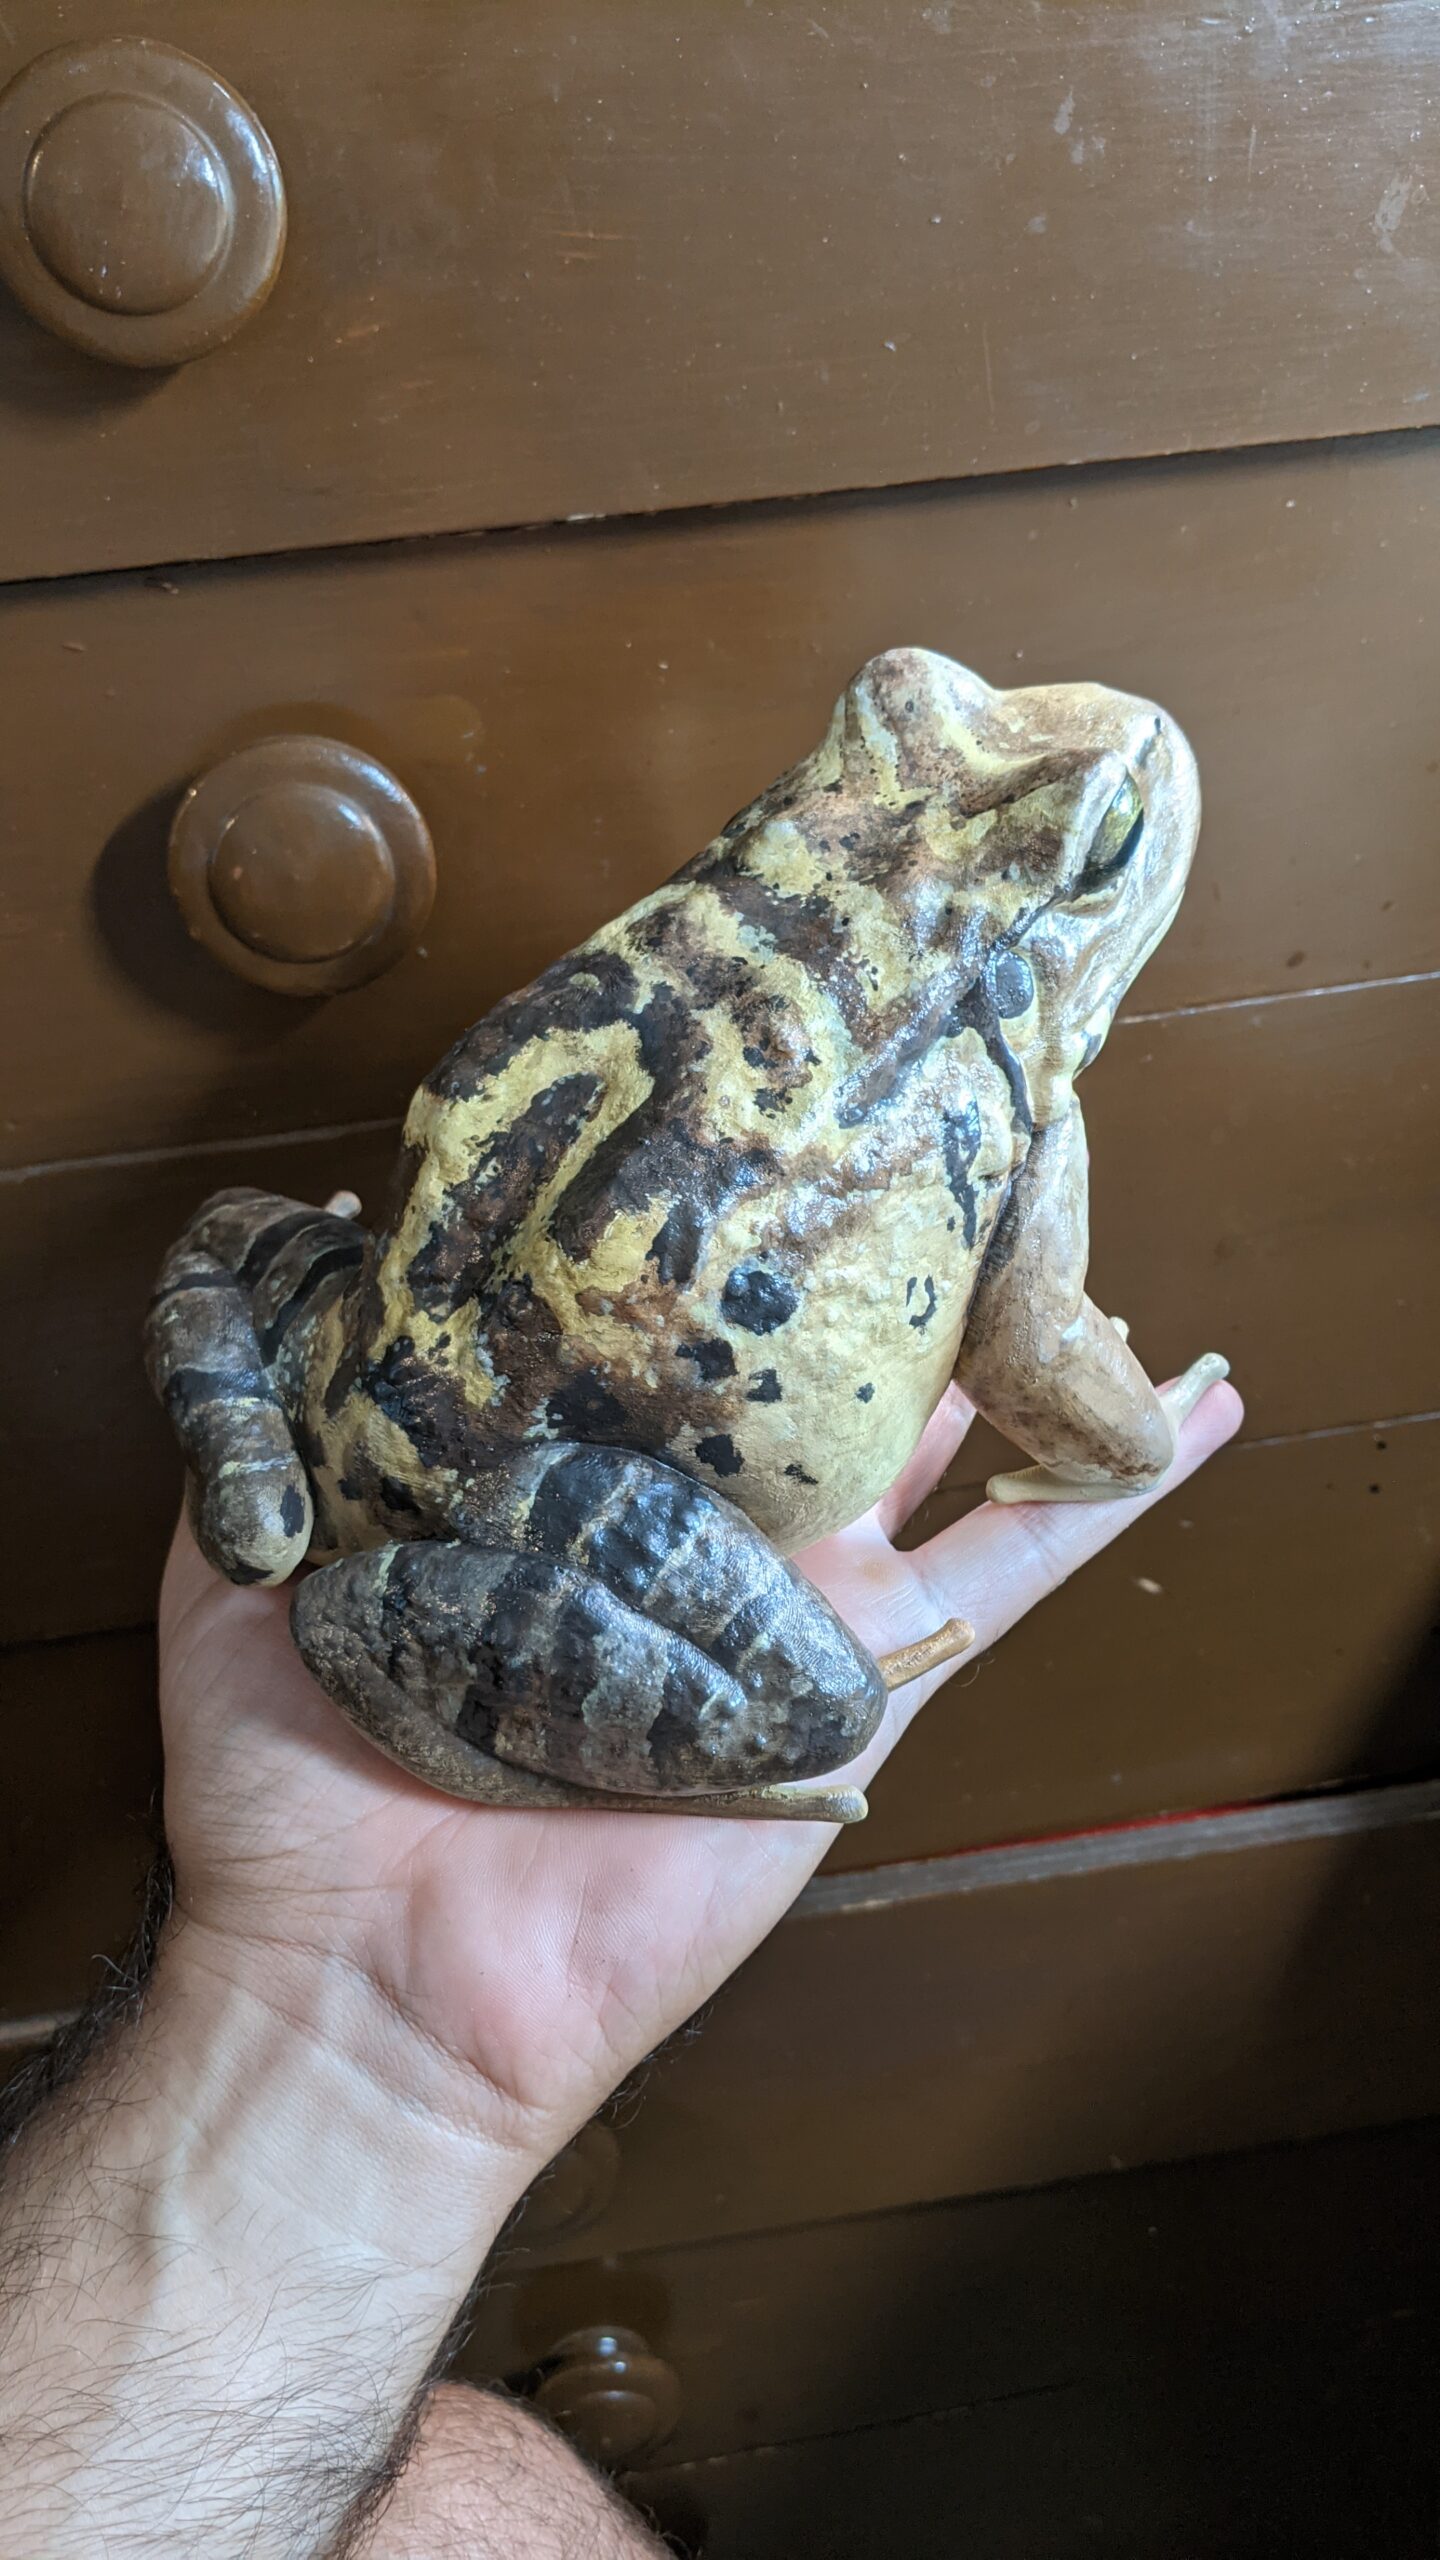 3D printed and painted Mountain Chicken Frog in a hand.